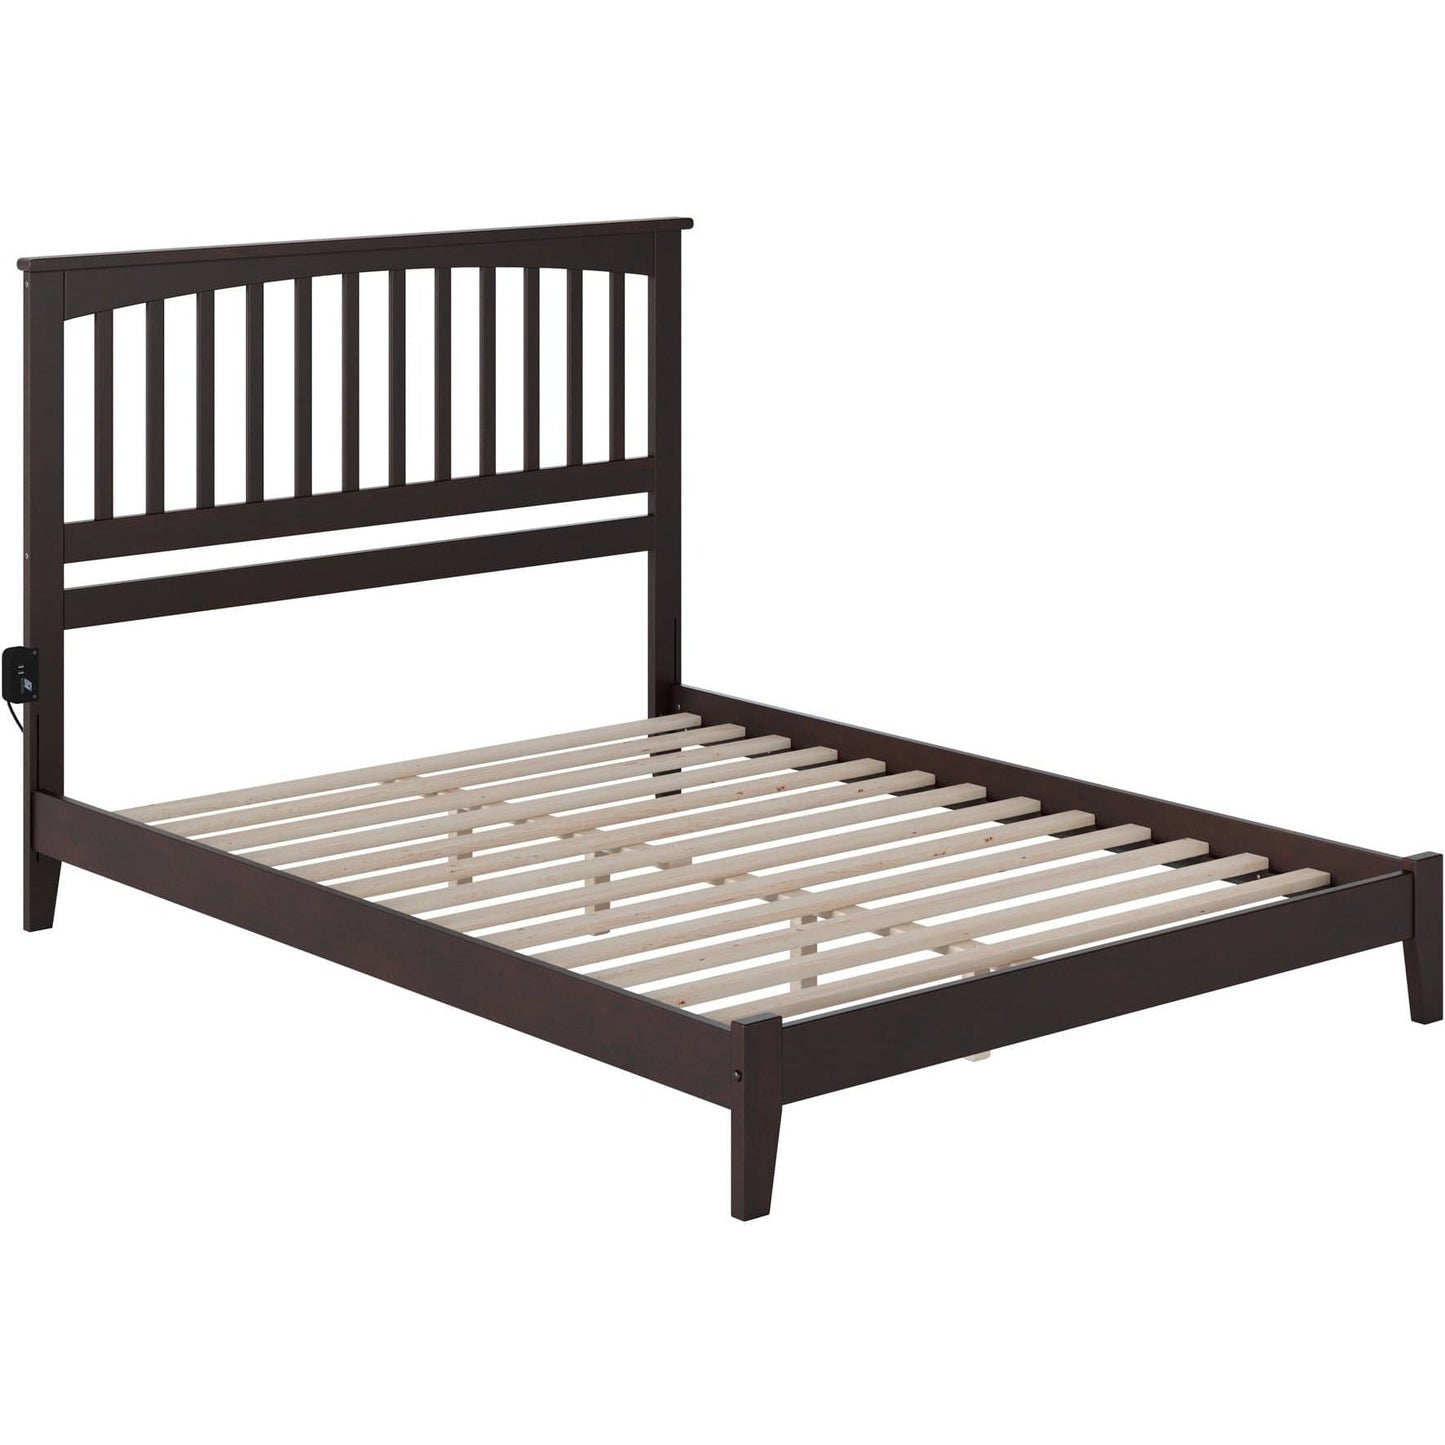 Atlantic Furniture Bed Mission Queen Platform Bed with Open Foot Board in Espresso